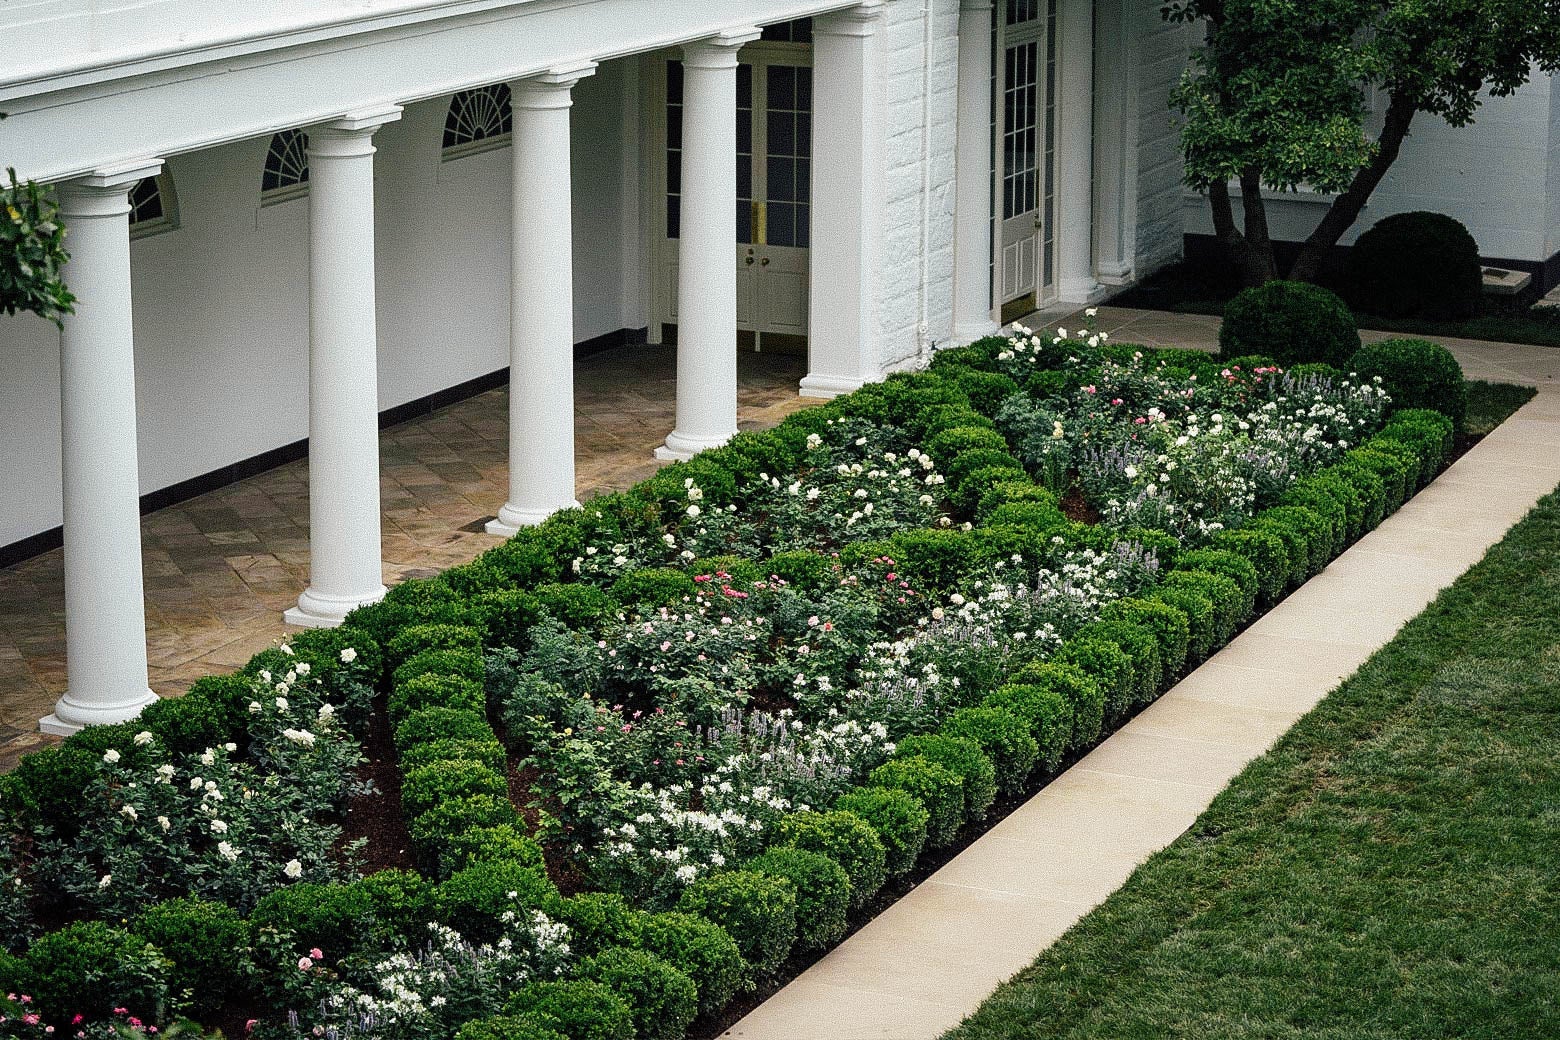 A view of the recently renovated Rose Garden at the White House